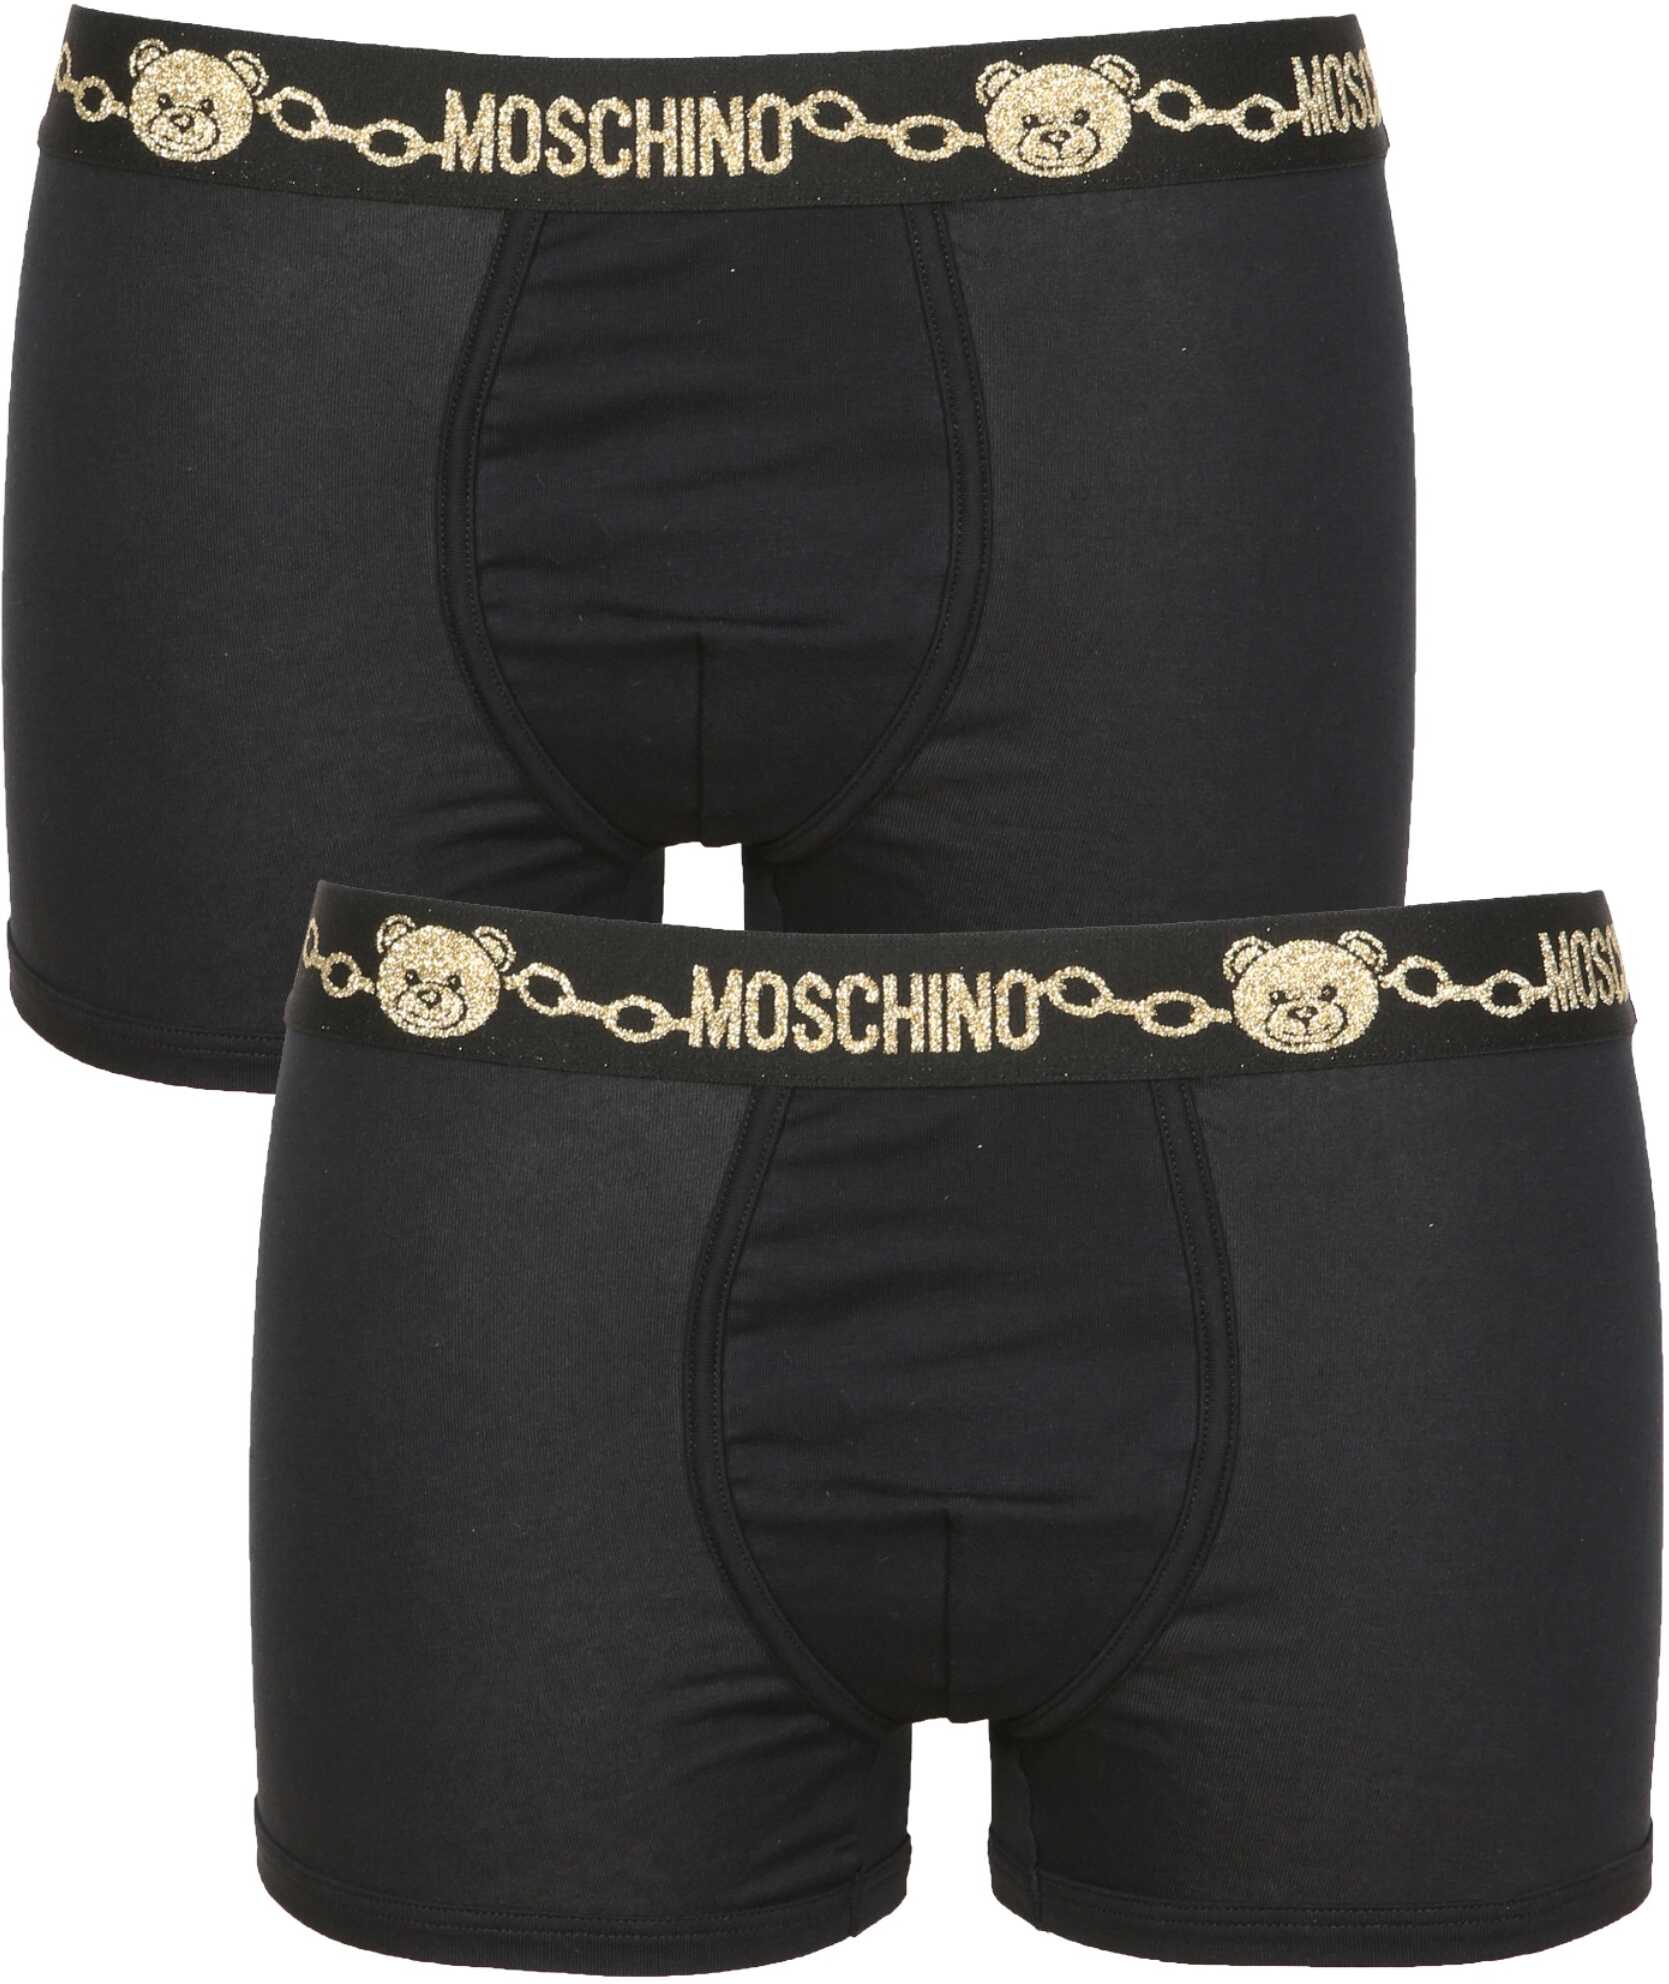 Moschino Pack Of Two "Chain Teddy" Boxers 47788123_0555 BLACK